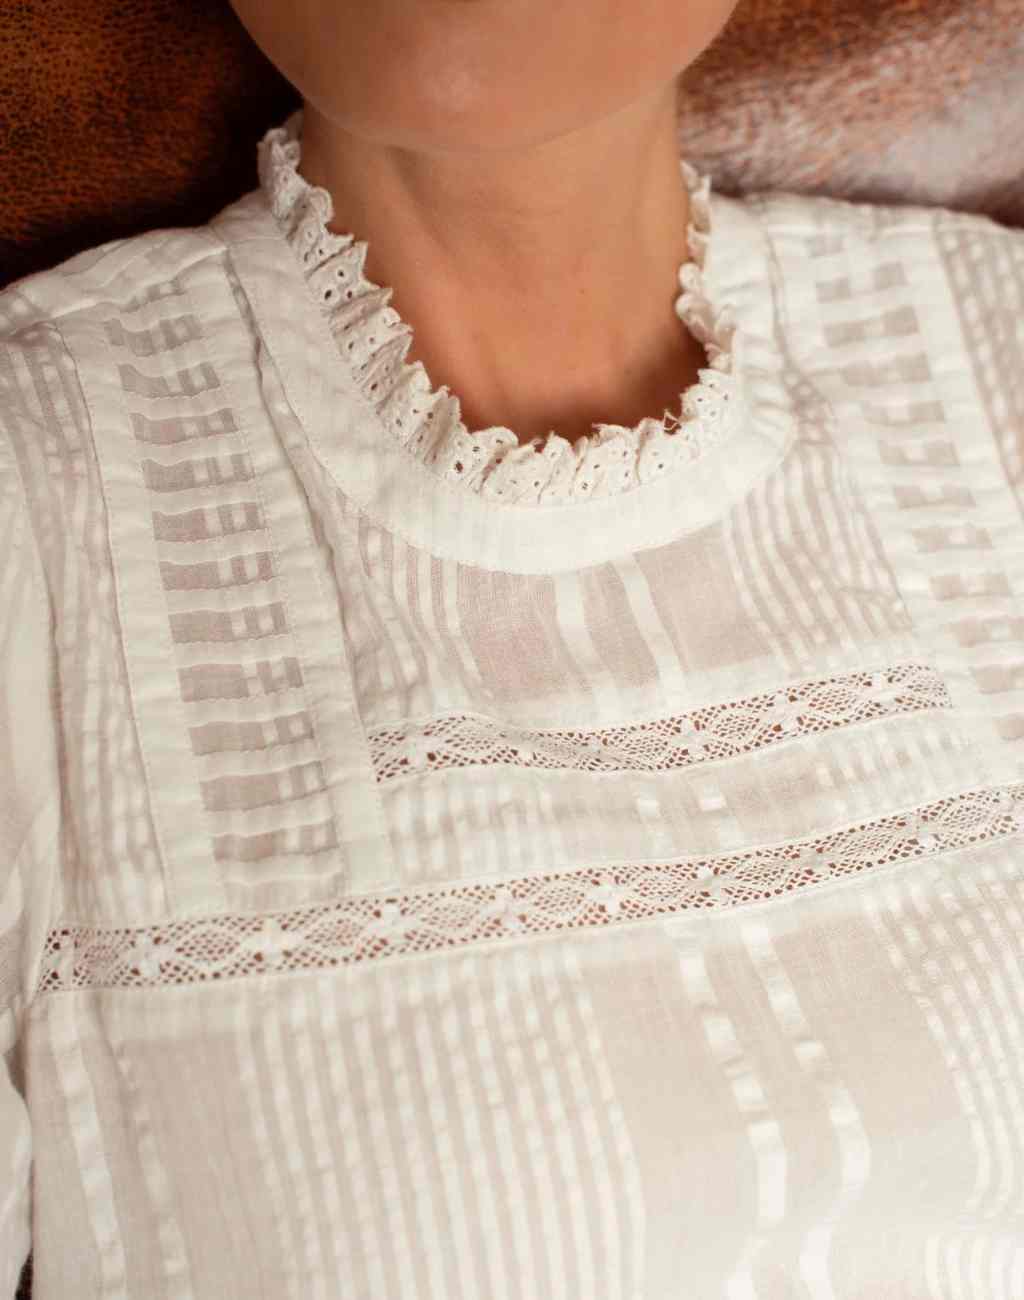 White Ruby Blouse with Pintucks at Neck and Hem | Seersucker and Lace Details